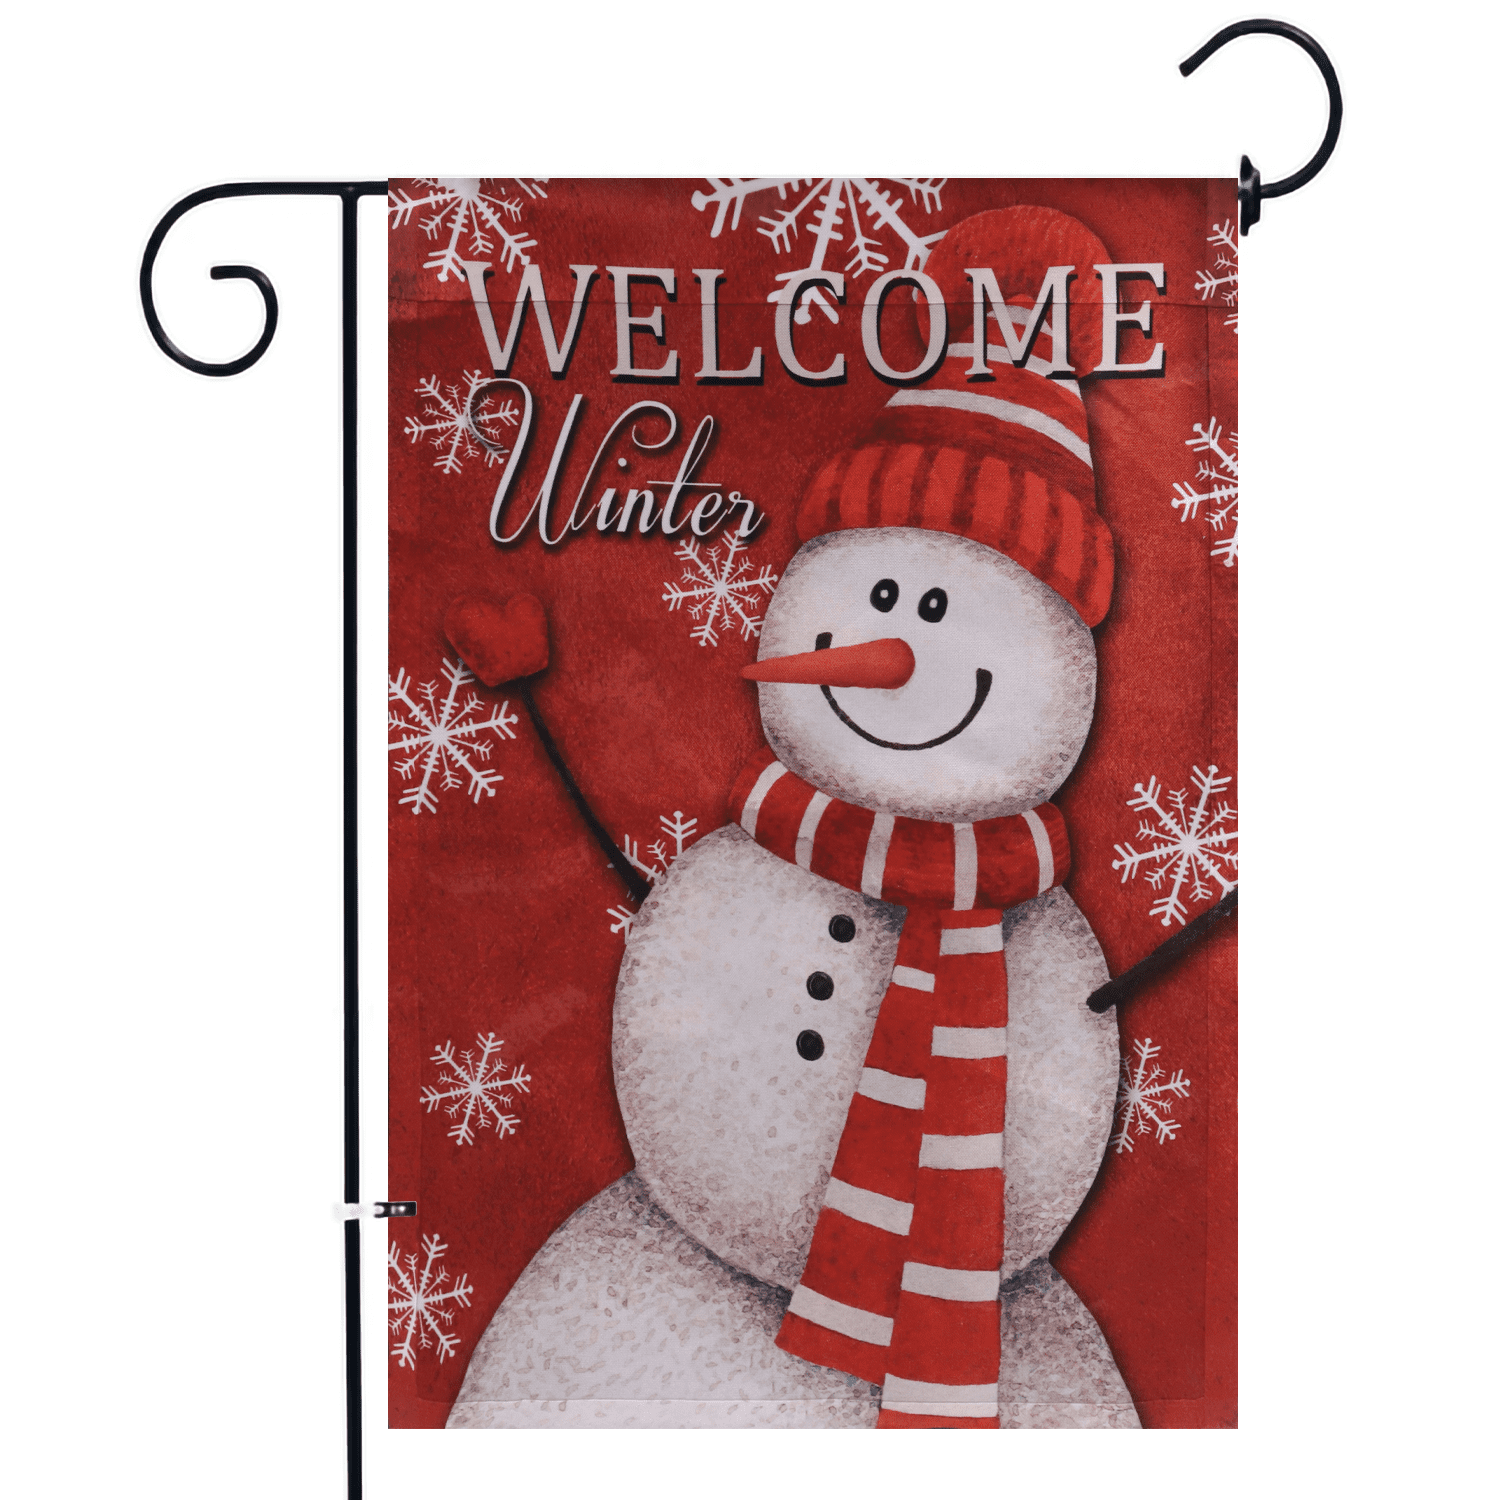 CHRISTMAS HOUSE SNOWMAN ** RED SCARF ** SO CUTE **11 INCHES ** NEW ** 